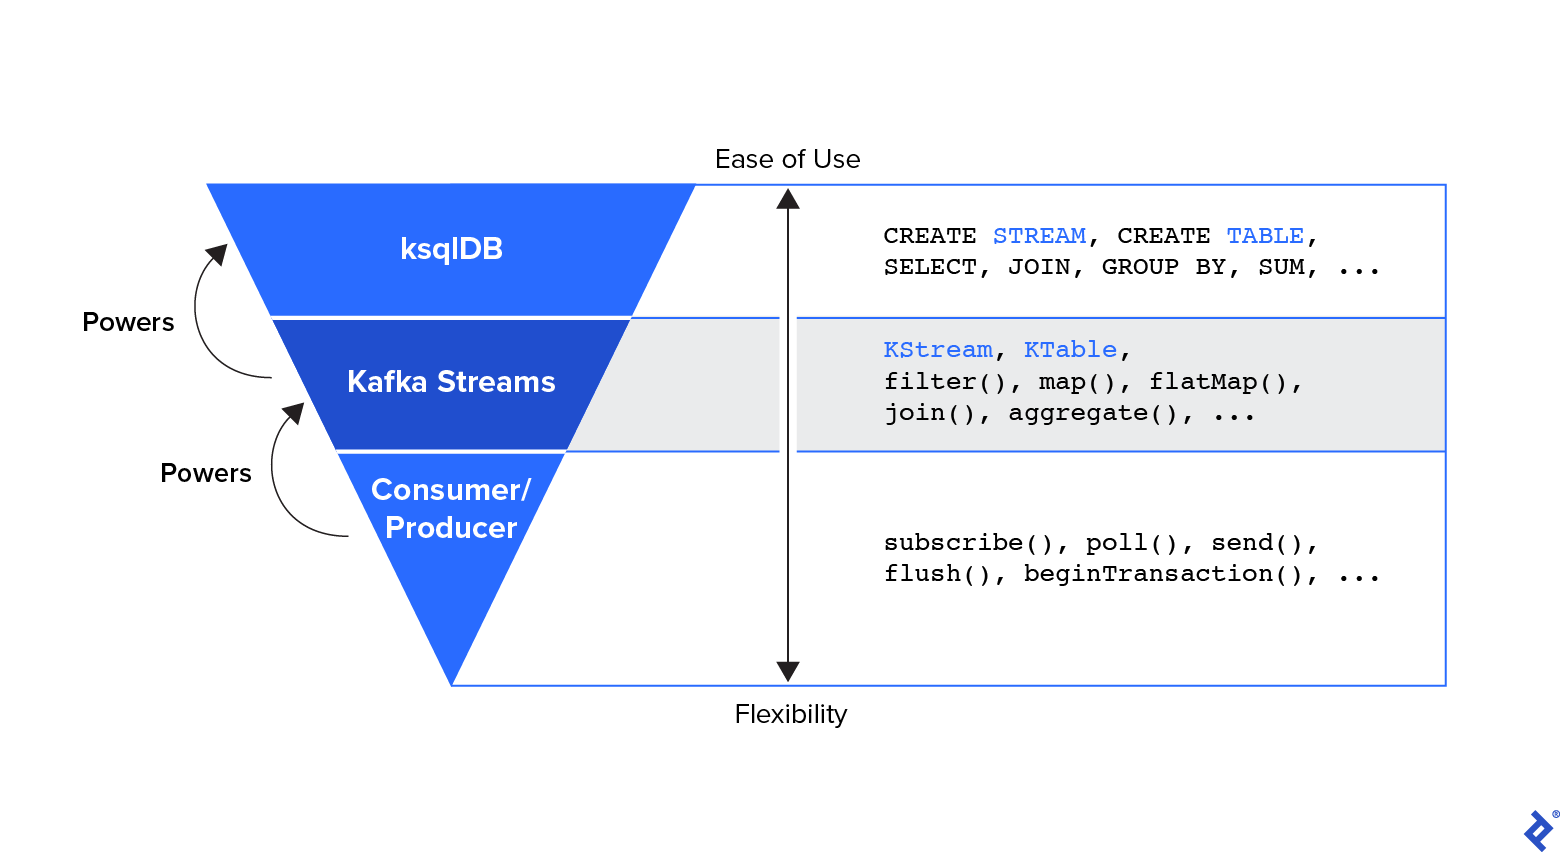 A diagram of an inverted pyramid in which ksqlDB is at the top, Kafka Streams is in the middle, and Consumer/Producer is at the bottom (the middle tier of the pyramid). The Kafka Streams tier powers the ksqlDB tier above it. The Consumer and Producer tier powers the Kafka Streams tier. A two-way arrow to the pyramid’s right delineates a spectrum from Ease of Use at the top to Flexibility at the bottom. On the right are examples of each tier of the pyramid. For ksqlDB: Create Stream, Create Table, Select, Join, Group By, or Sum, etc. For Kafka Streams: KStream, KTable, filter(), map(), flatMap(), join(), or aggregate(), etc. For Consumer/Producer: subscribe(), poll(), send(), flush(), or beginTransaction(), etc. To show their correspondence, Stream and Table from ksqlDB and KStream and KTable from Kafka Streams are highlighted in blue.